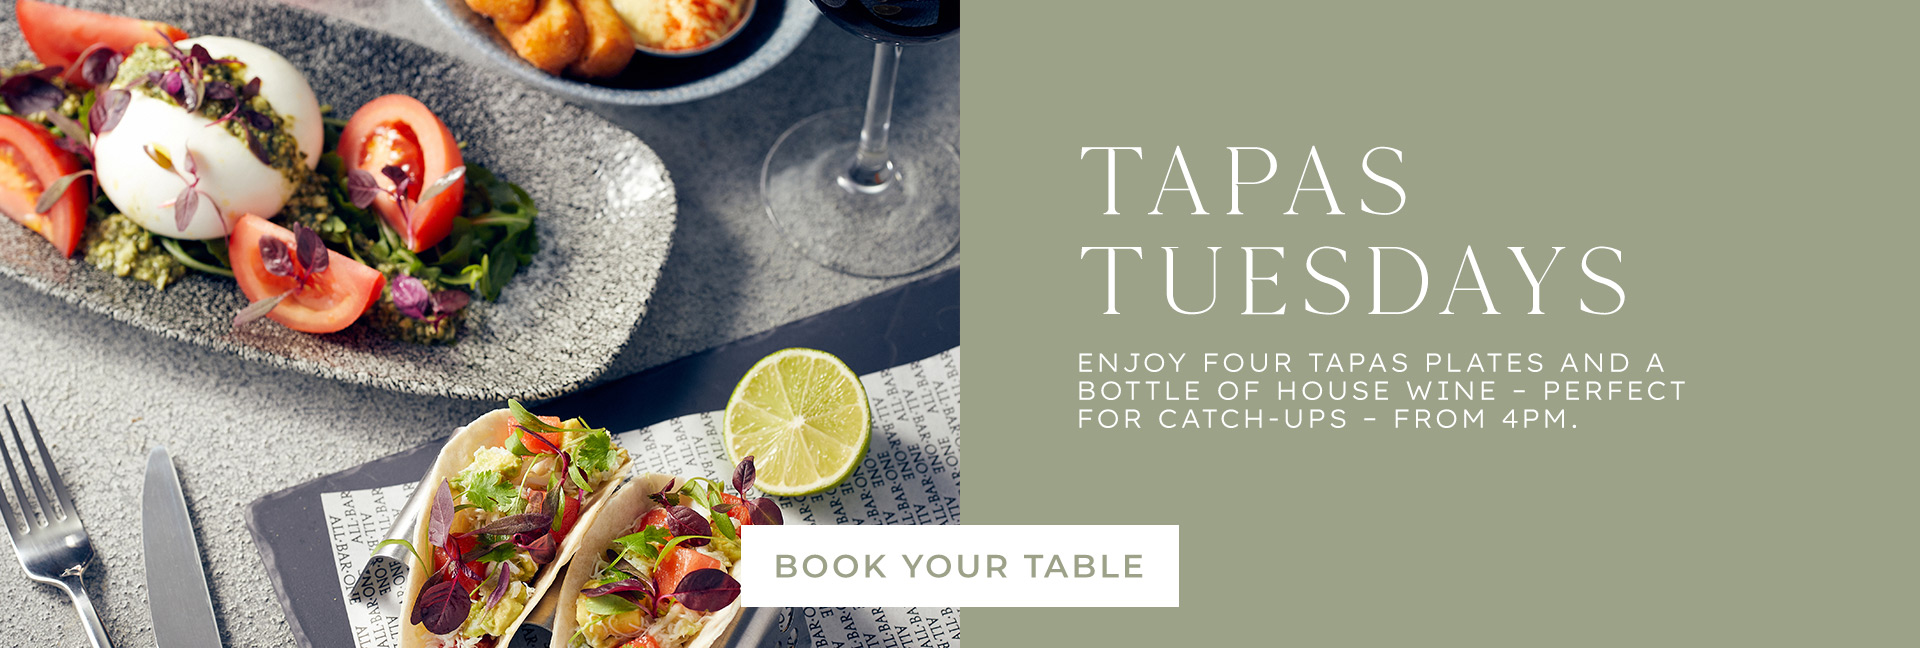 Tapas Tuesday at All Bar One Charing Cross - Book now